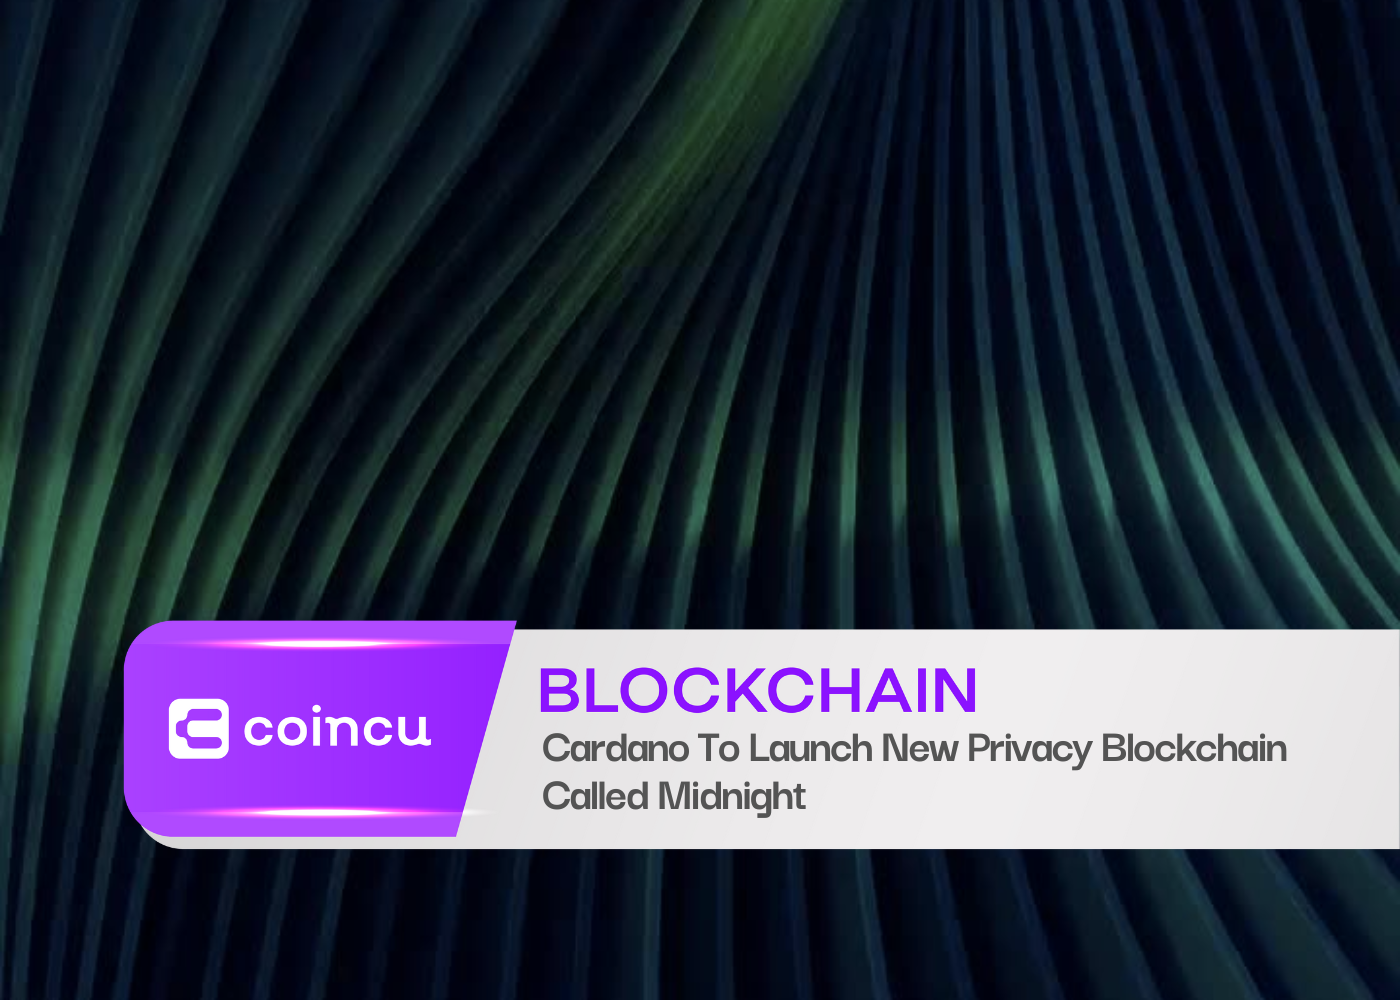 Cardano To Launch New Privacy Blockchain Called Midnight